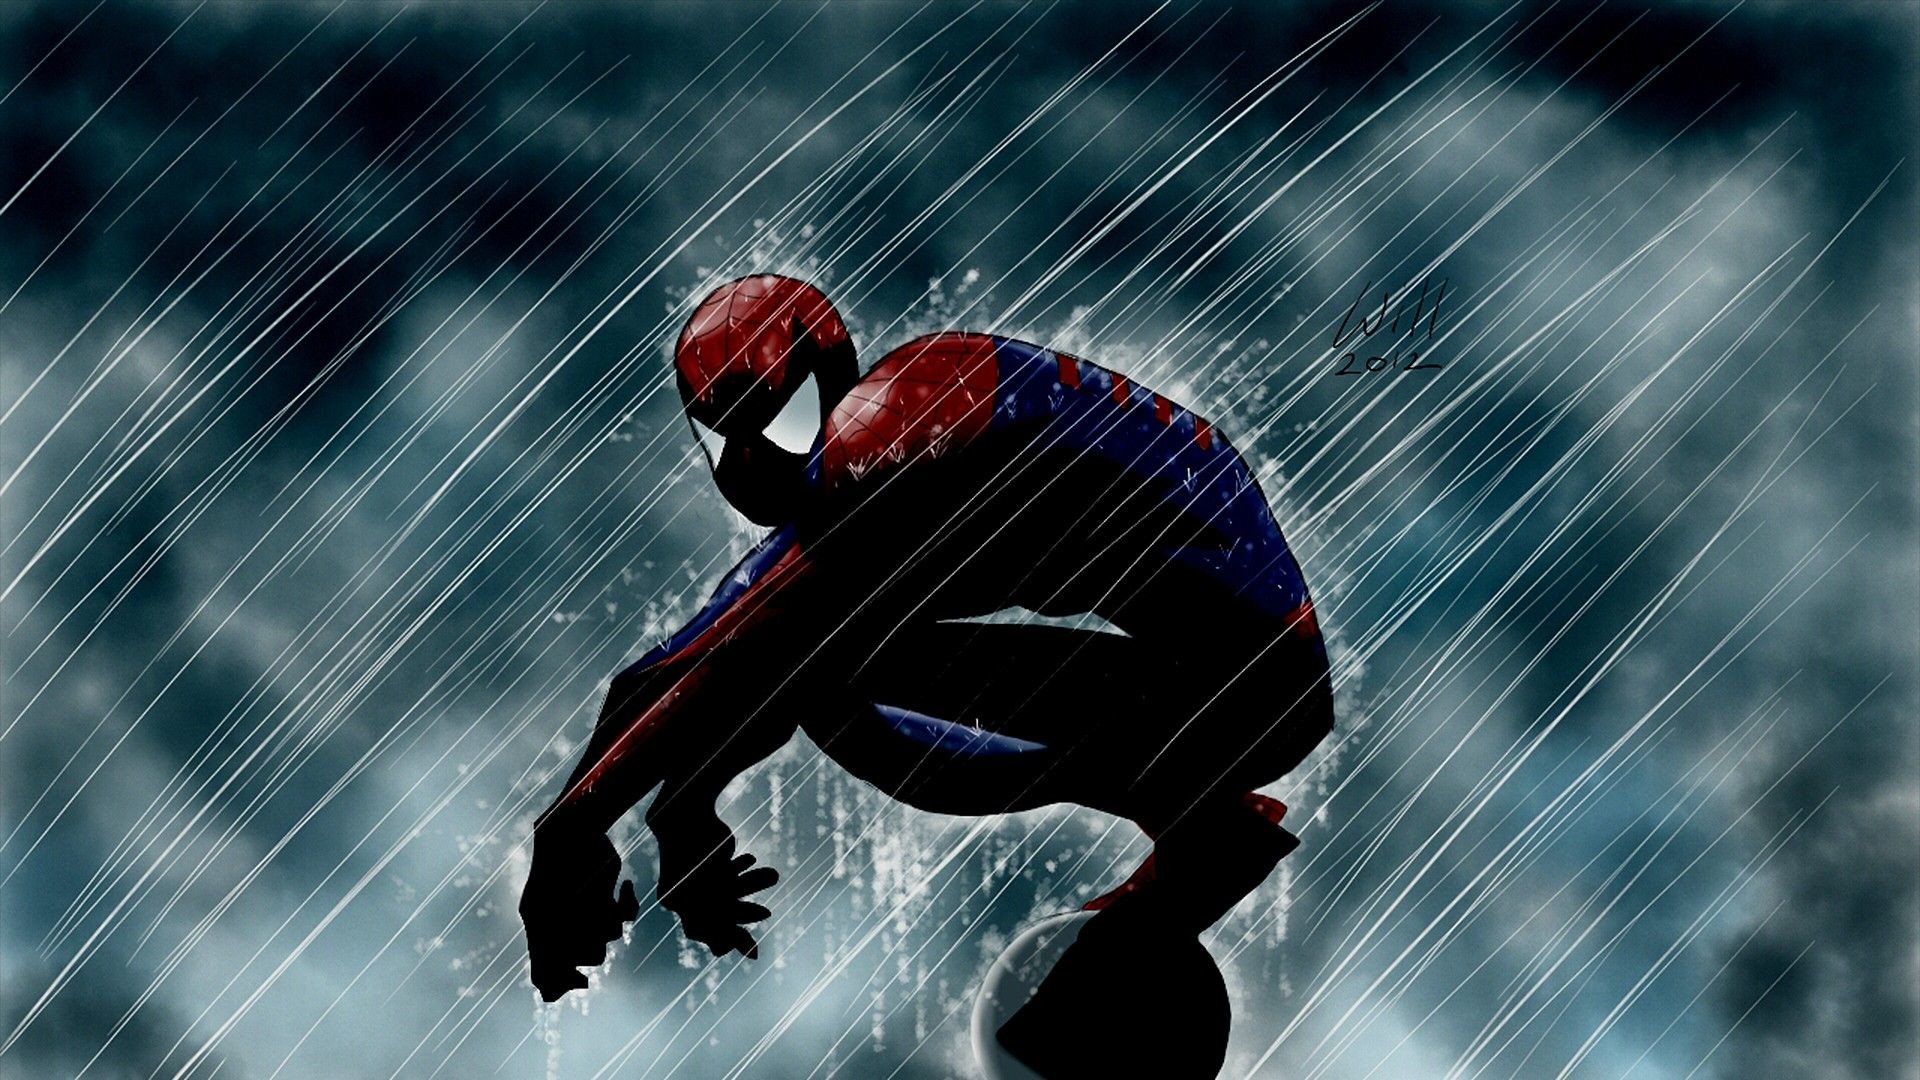 Awesome dramatic Spiderman in the rain wallpaper [1920×1080]